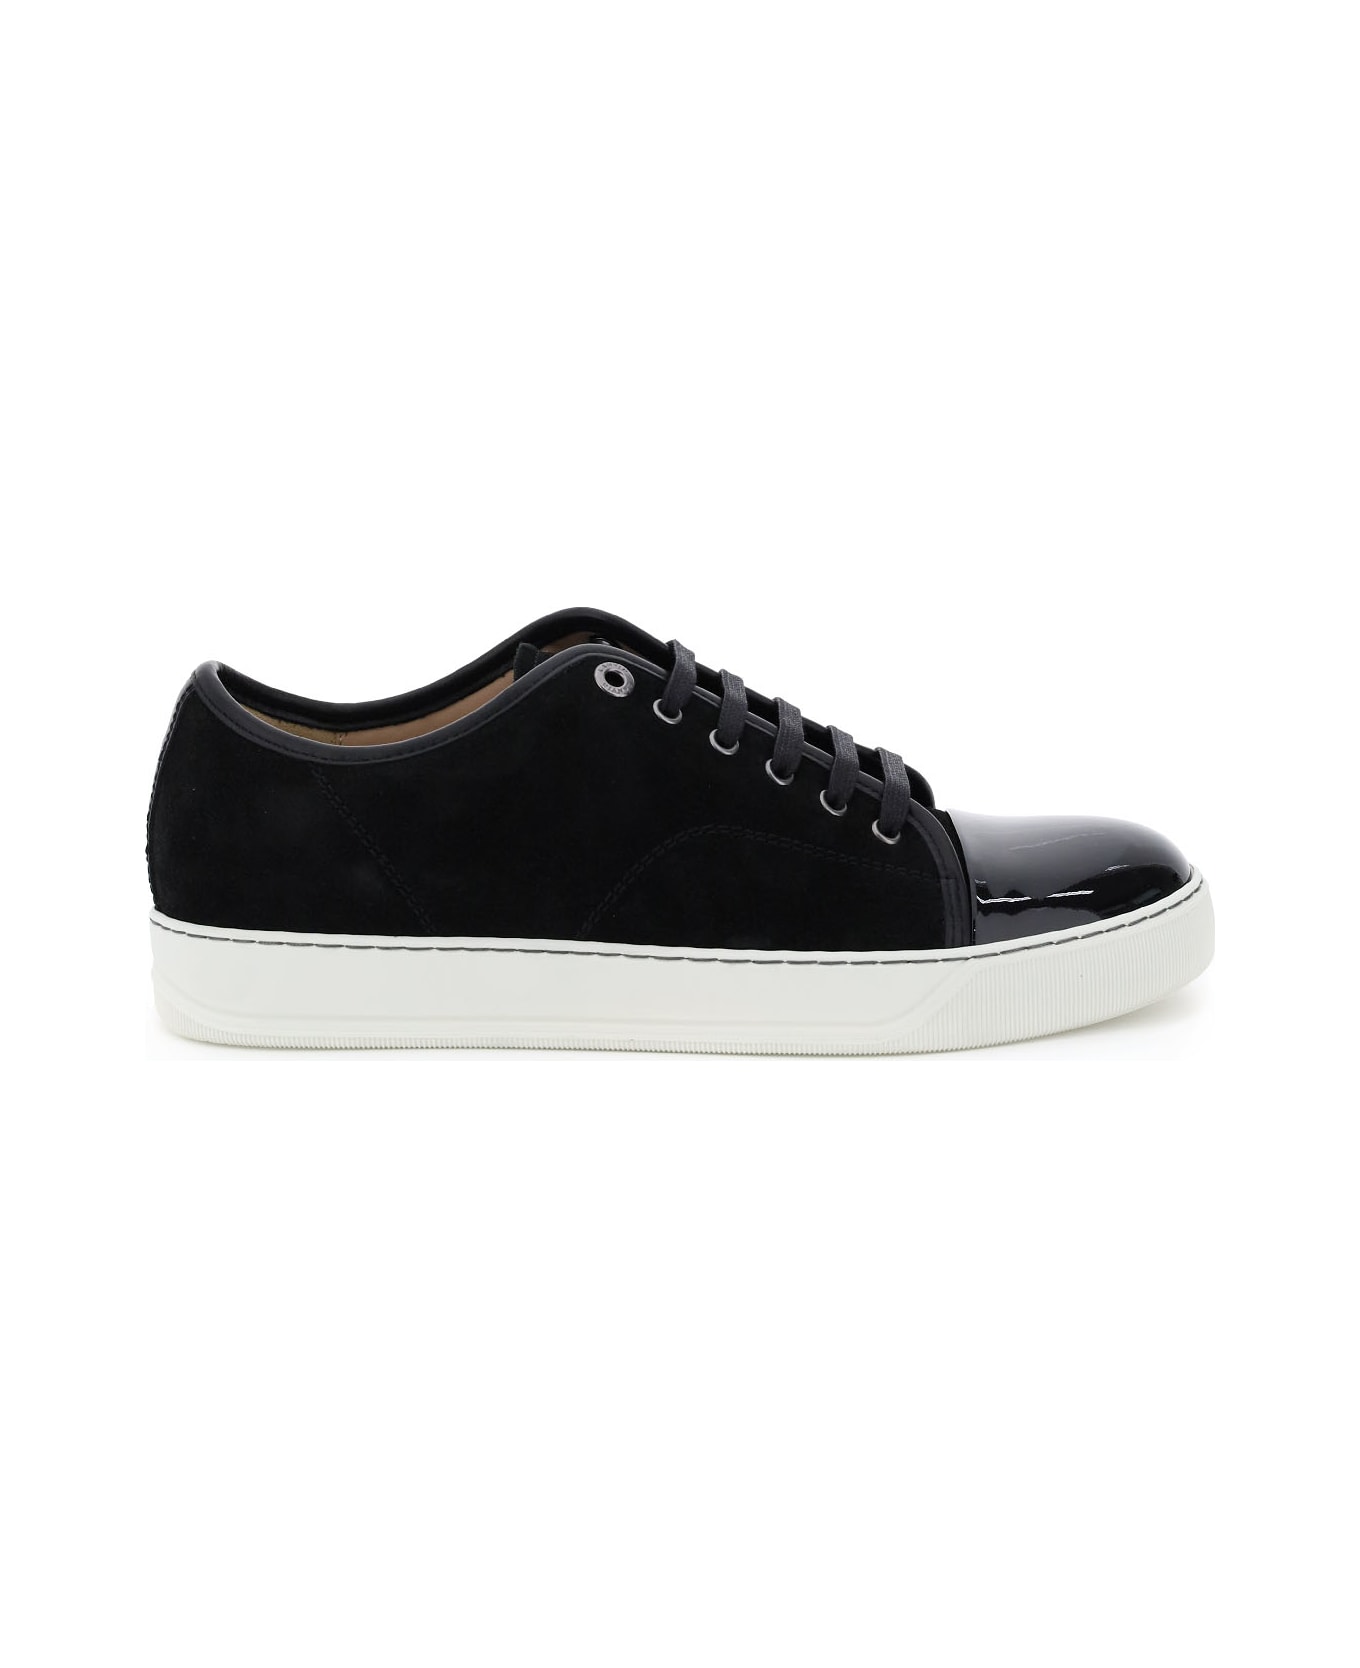 Lanvin Dbb1 Sneakers In Black Suede And Leather - BLACK (Black)